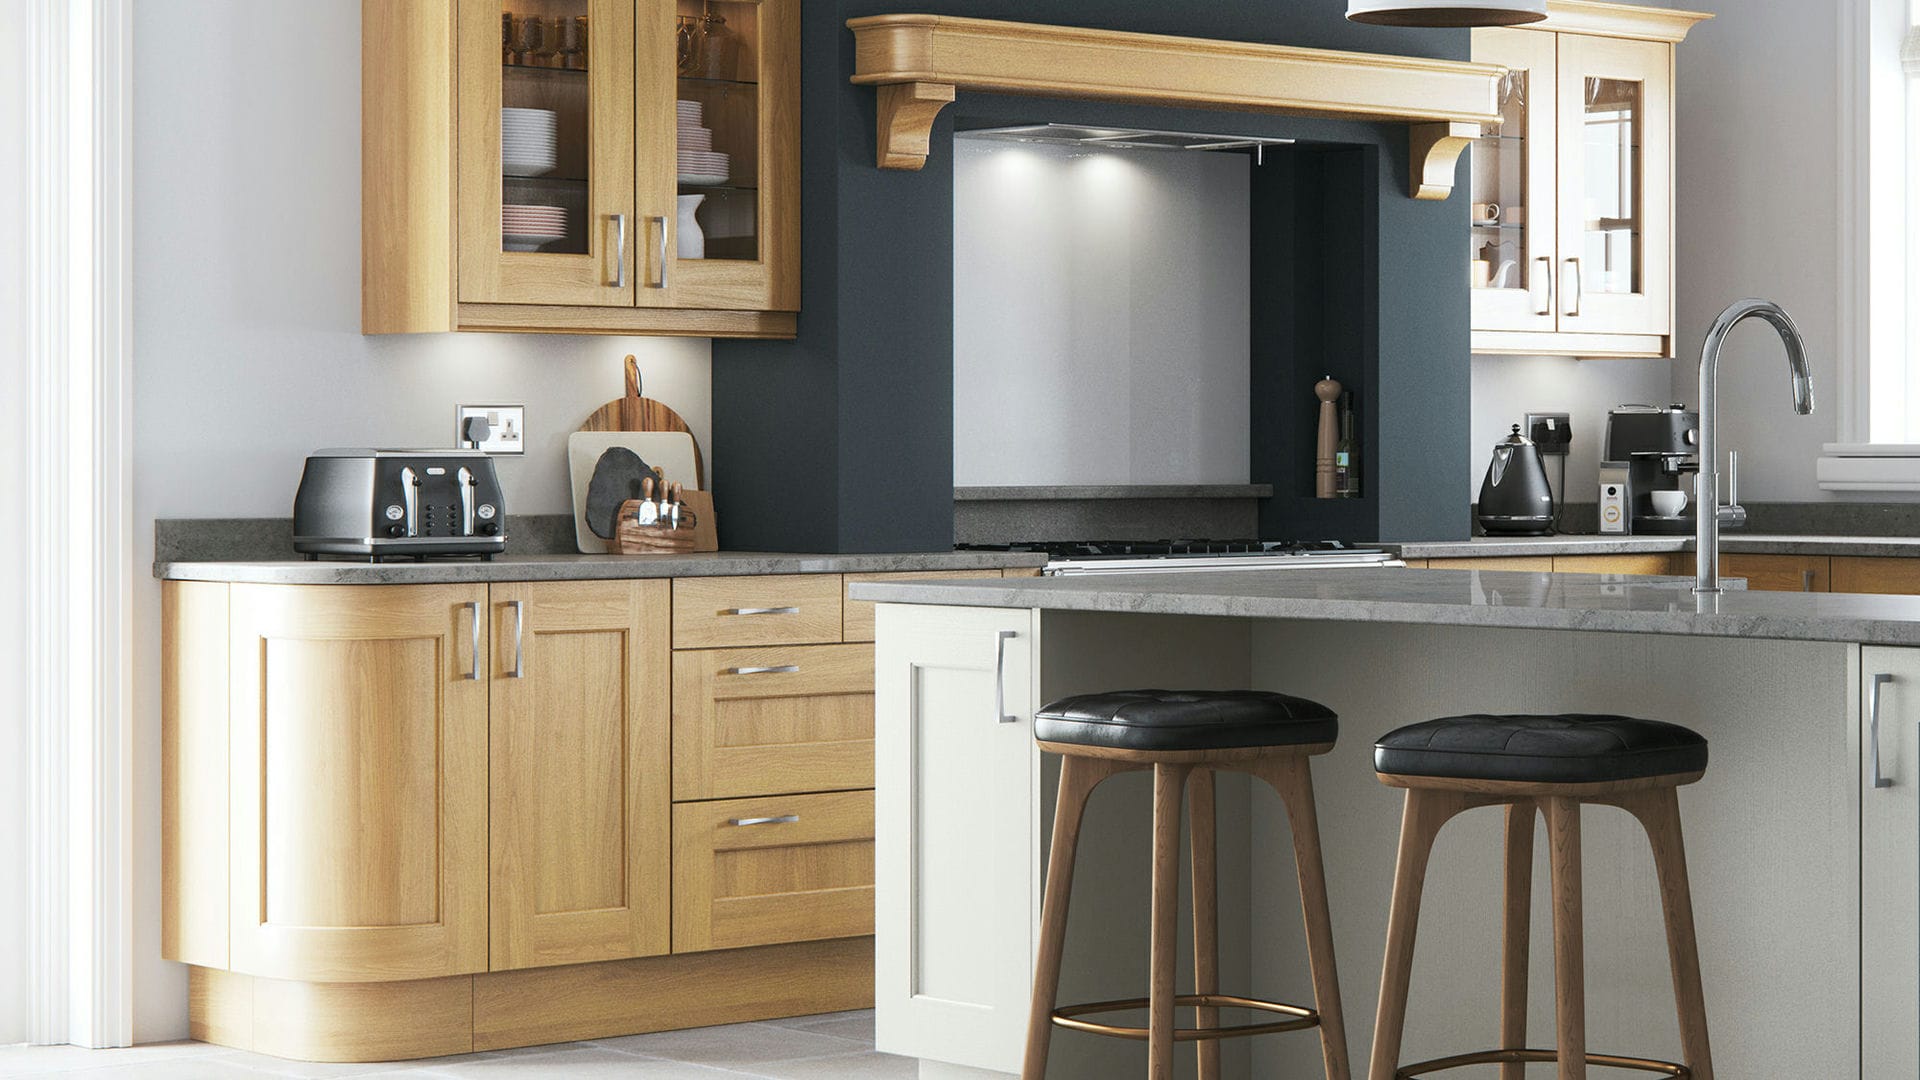 Solid wood Wakefield oak kitchens highlighting traditional craftsmanship in a robust oak finish